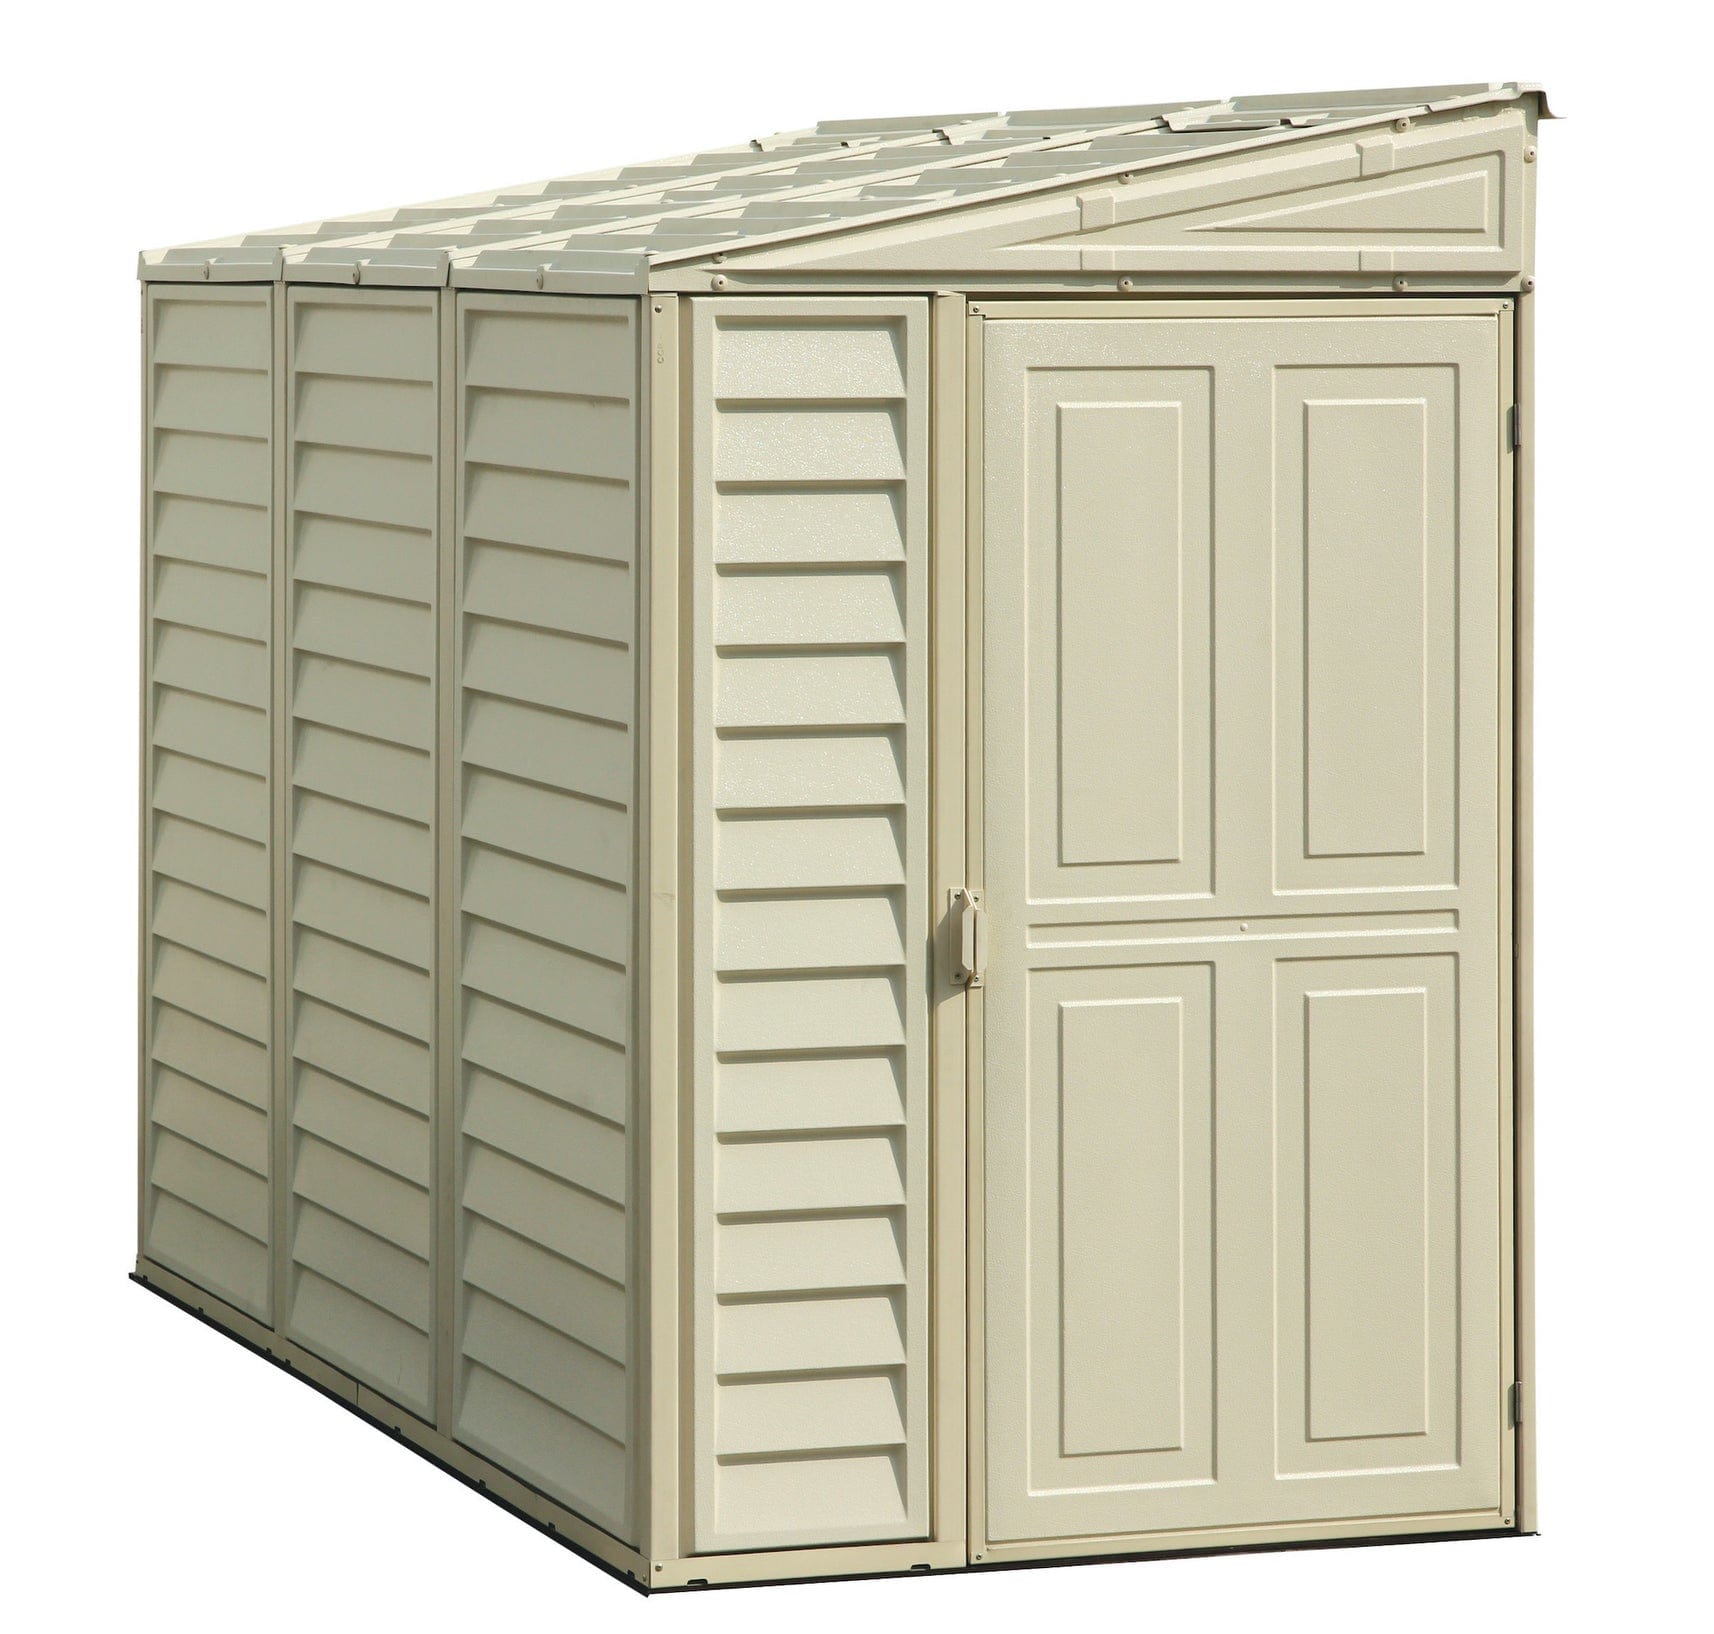 DuraMax Vinyl Shed 4x8 SideMate with Foundation Kit